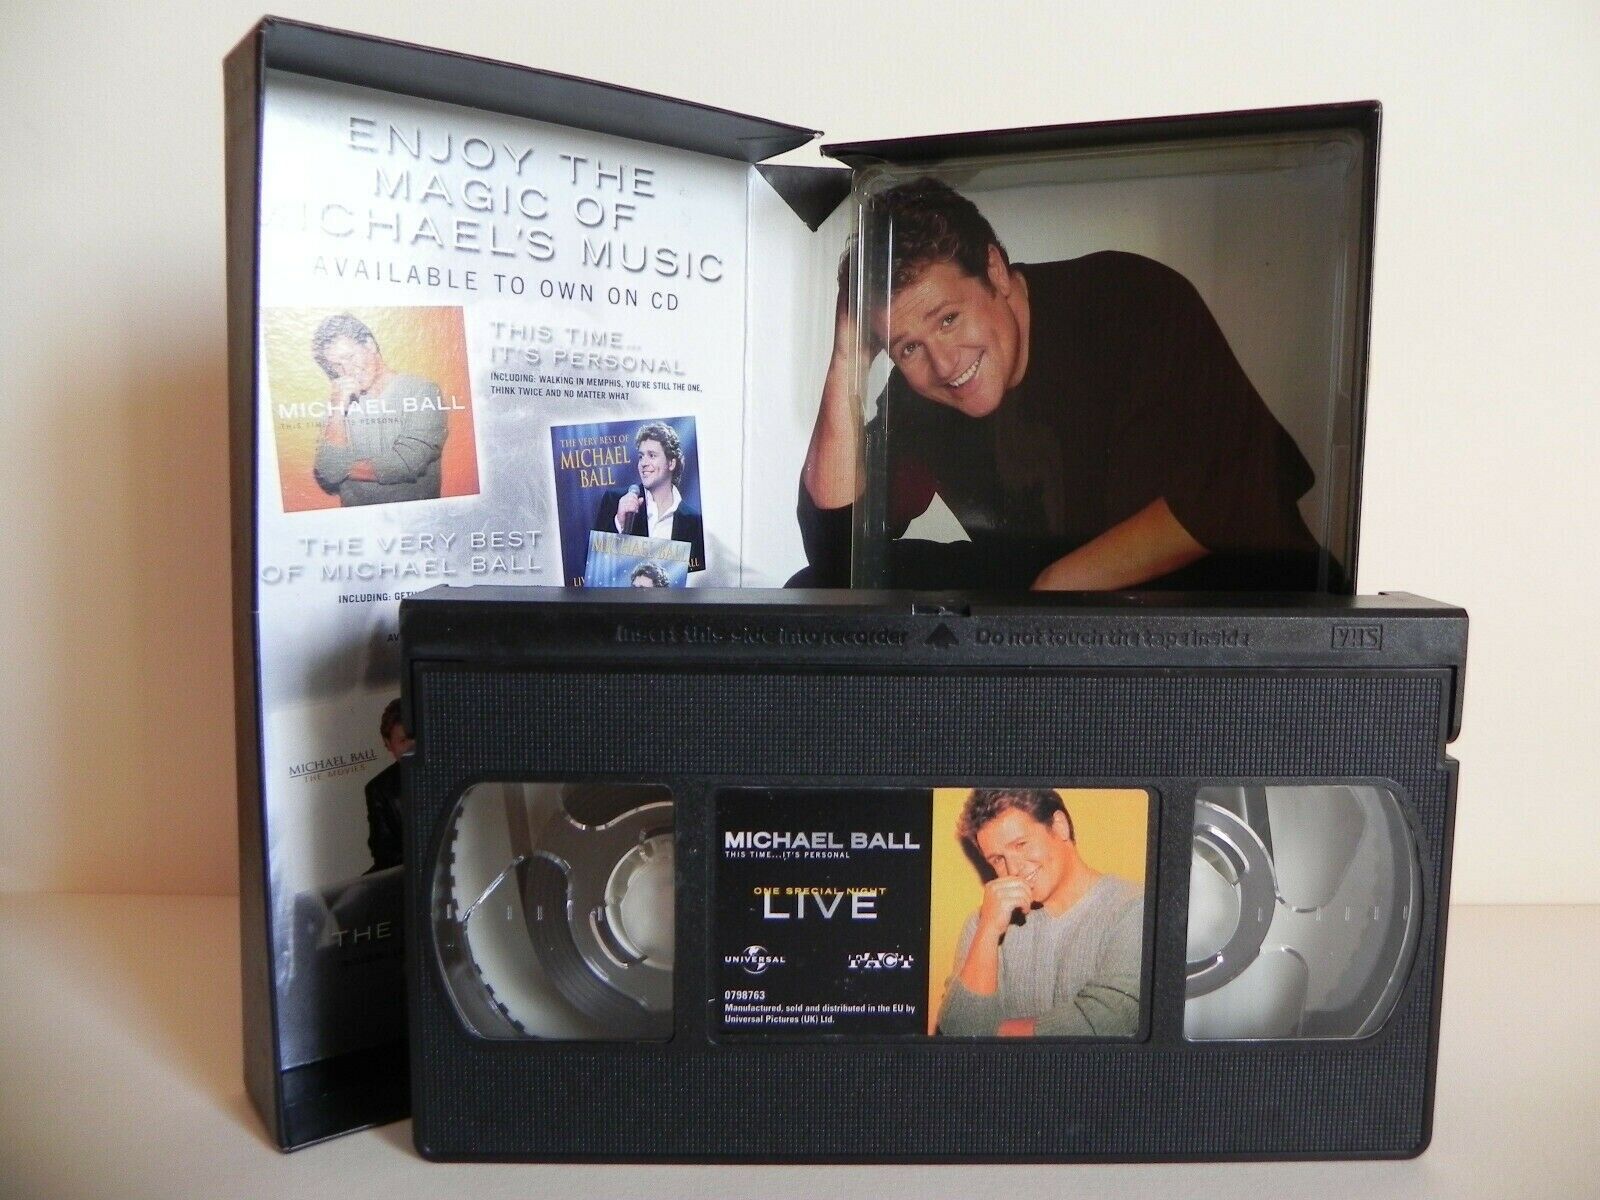 Michael Ball: This Time...It's Personal - Universal - Special Concert - Pal VHS-